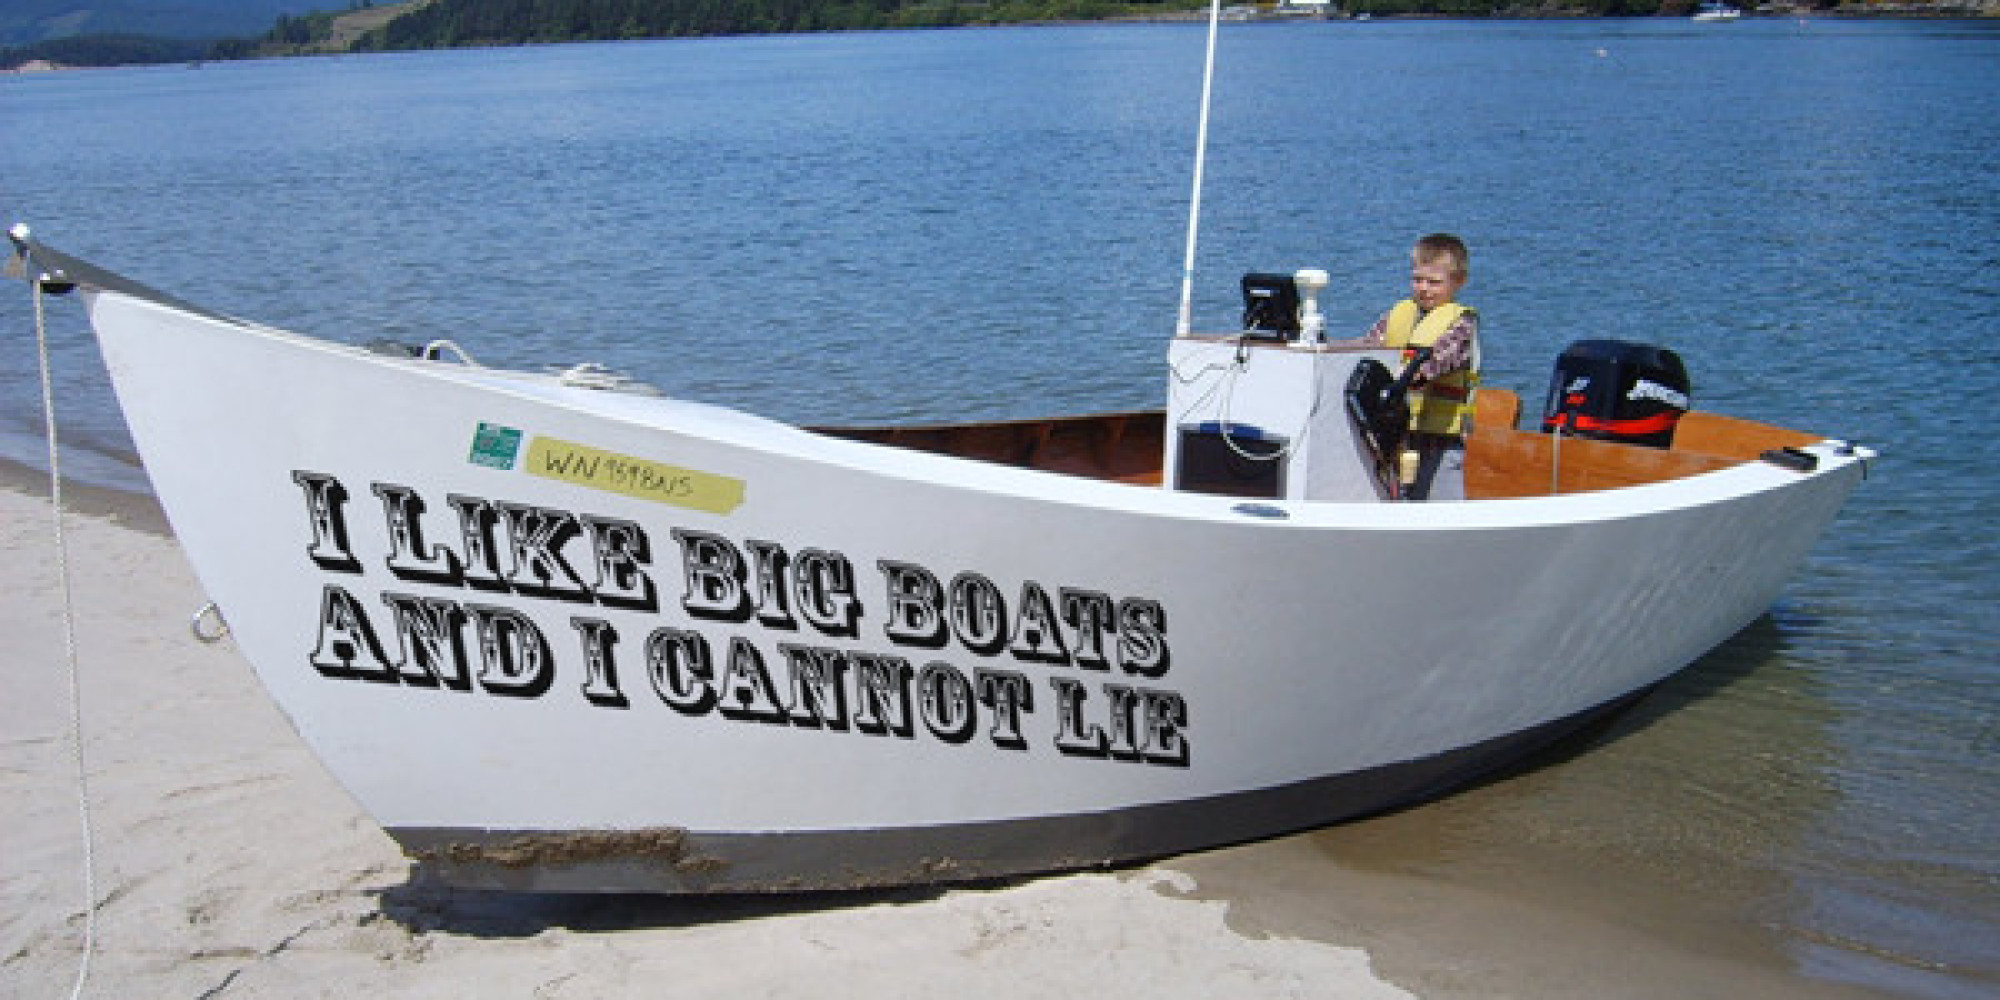 11 Hilarious Boat Names That Need To Be On Real Boats ...